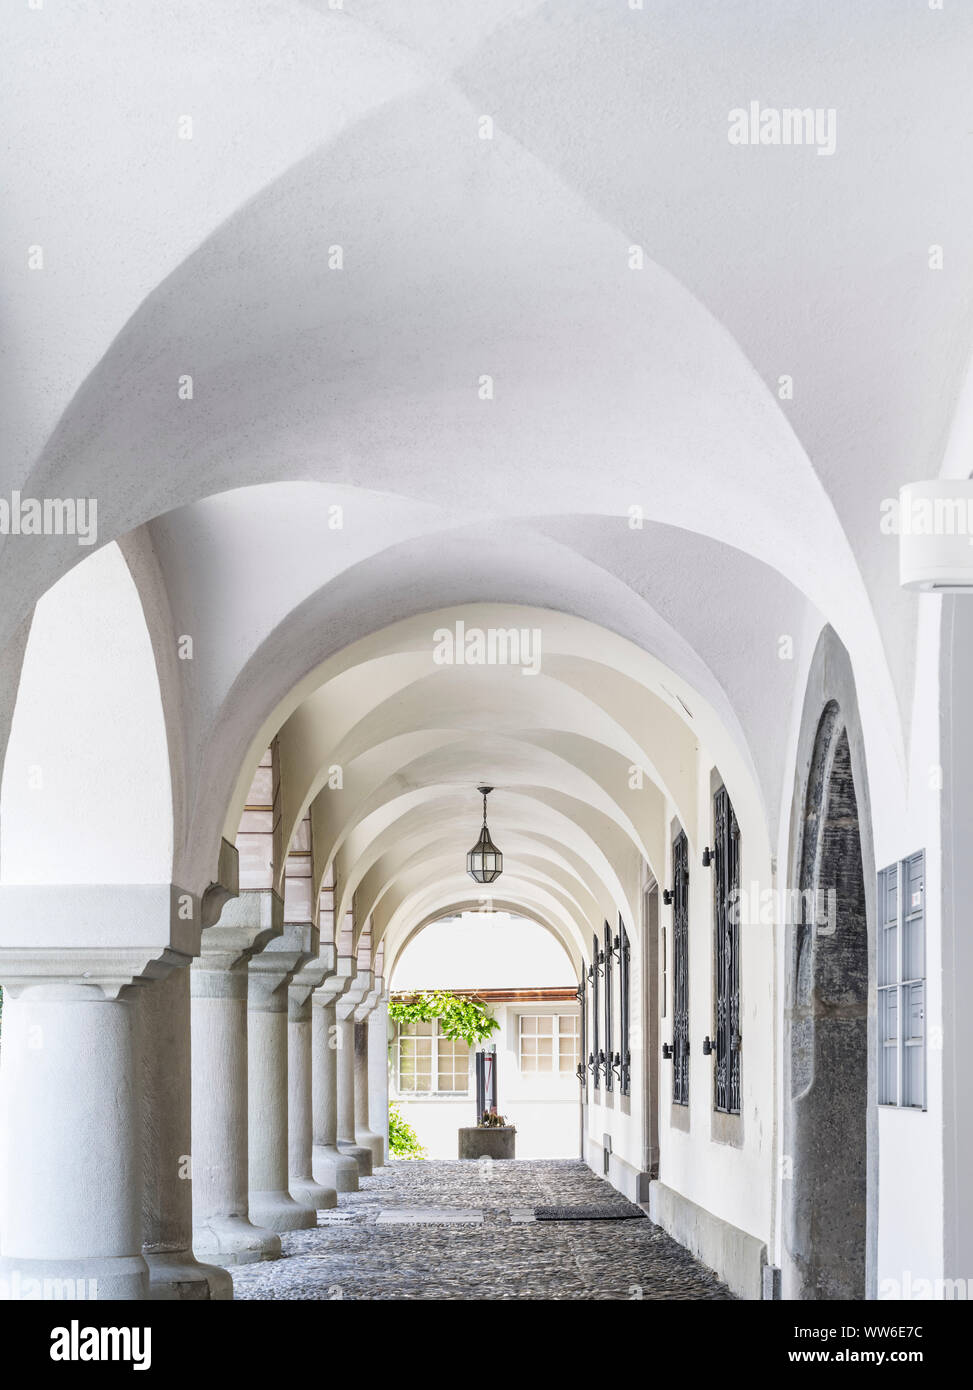 Arcades in the old town of Wil, St. Gallen Stock Photo